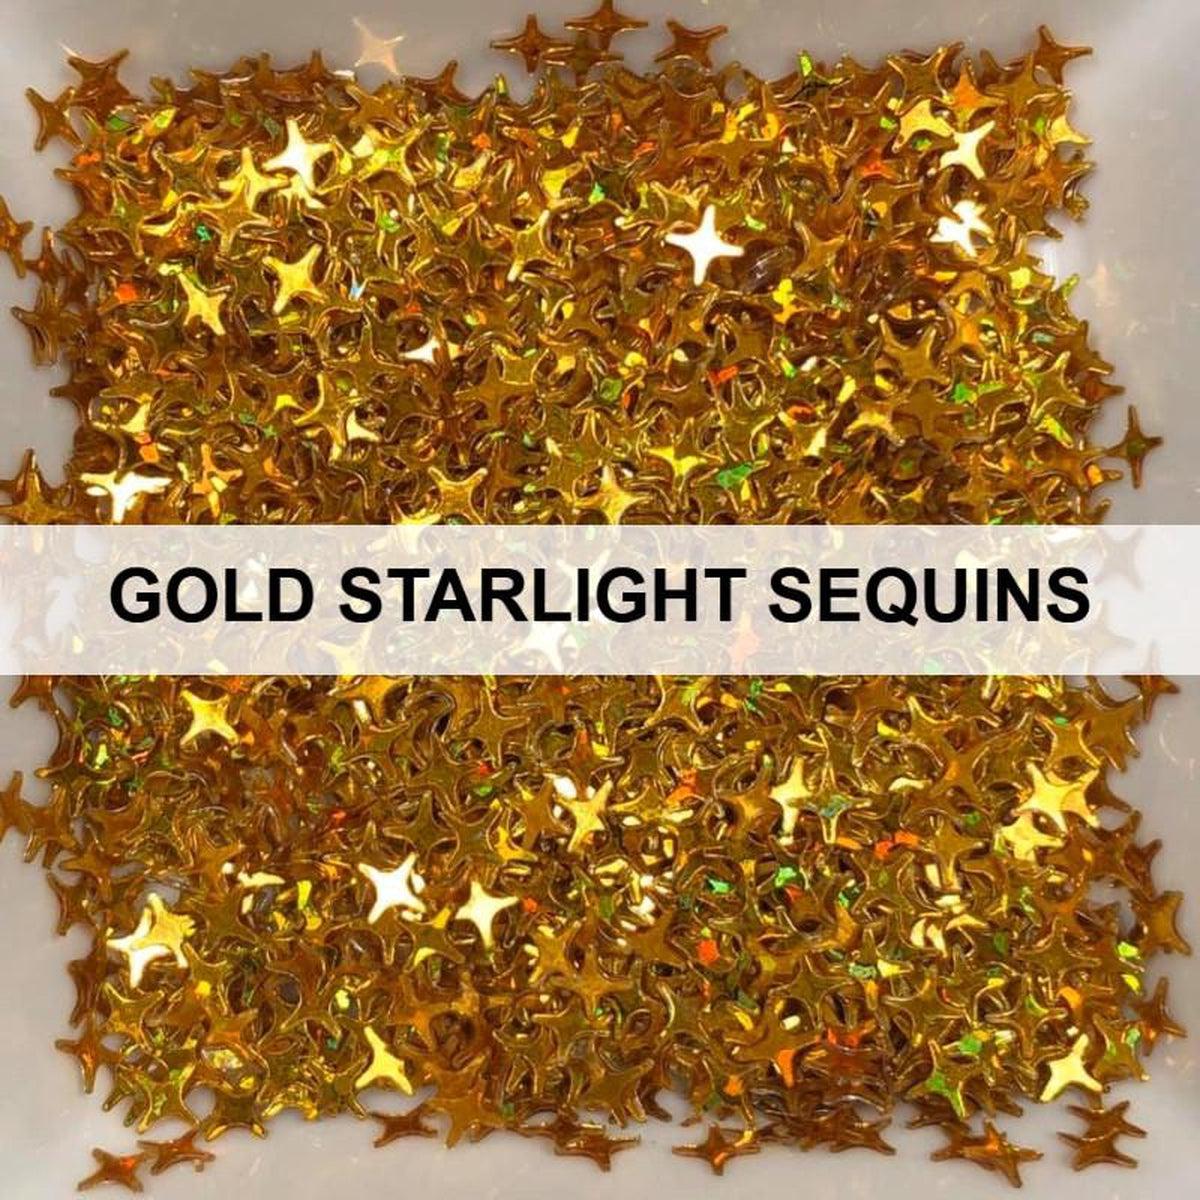 Gold Starlights - Sequins - Kat Scrappiness